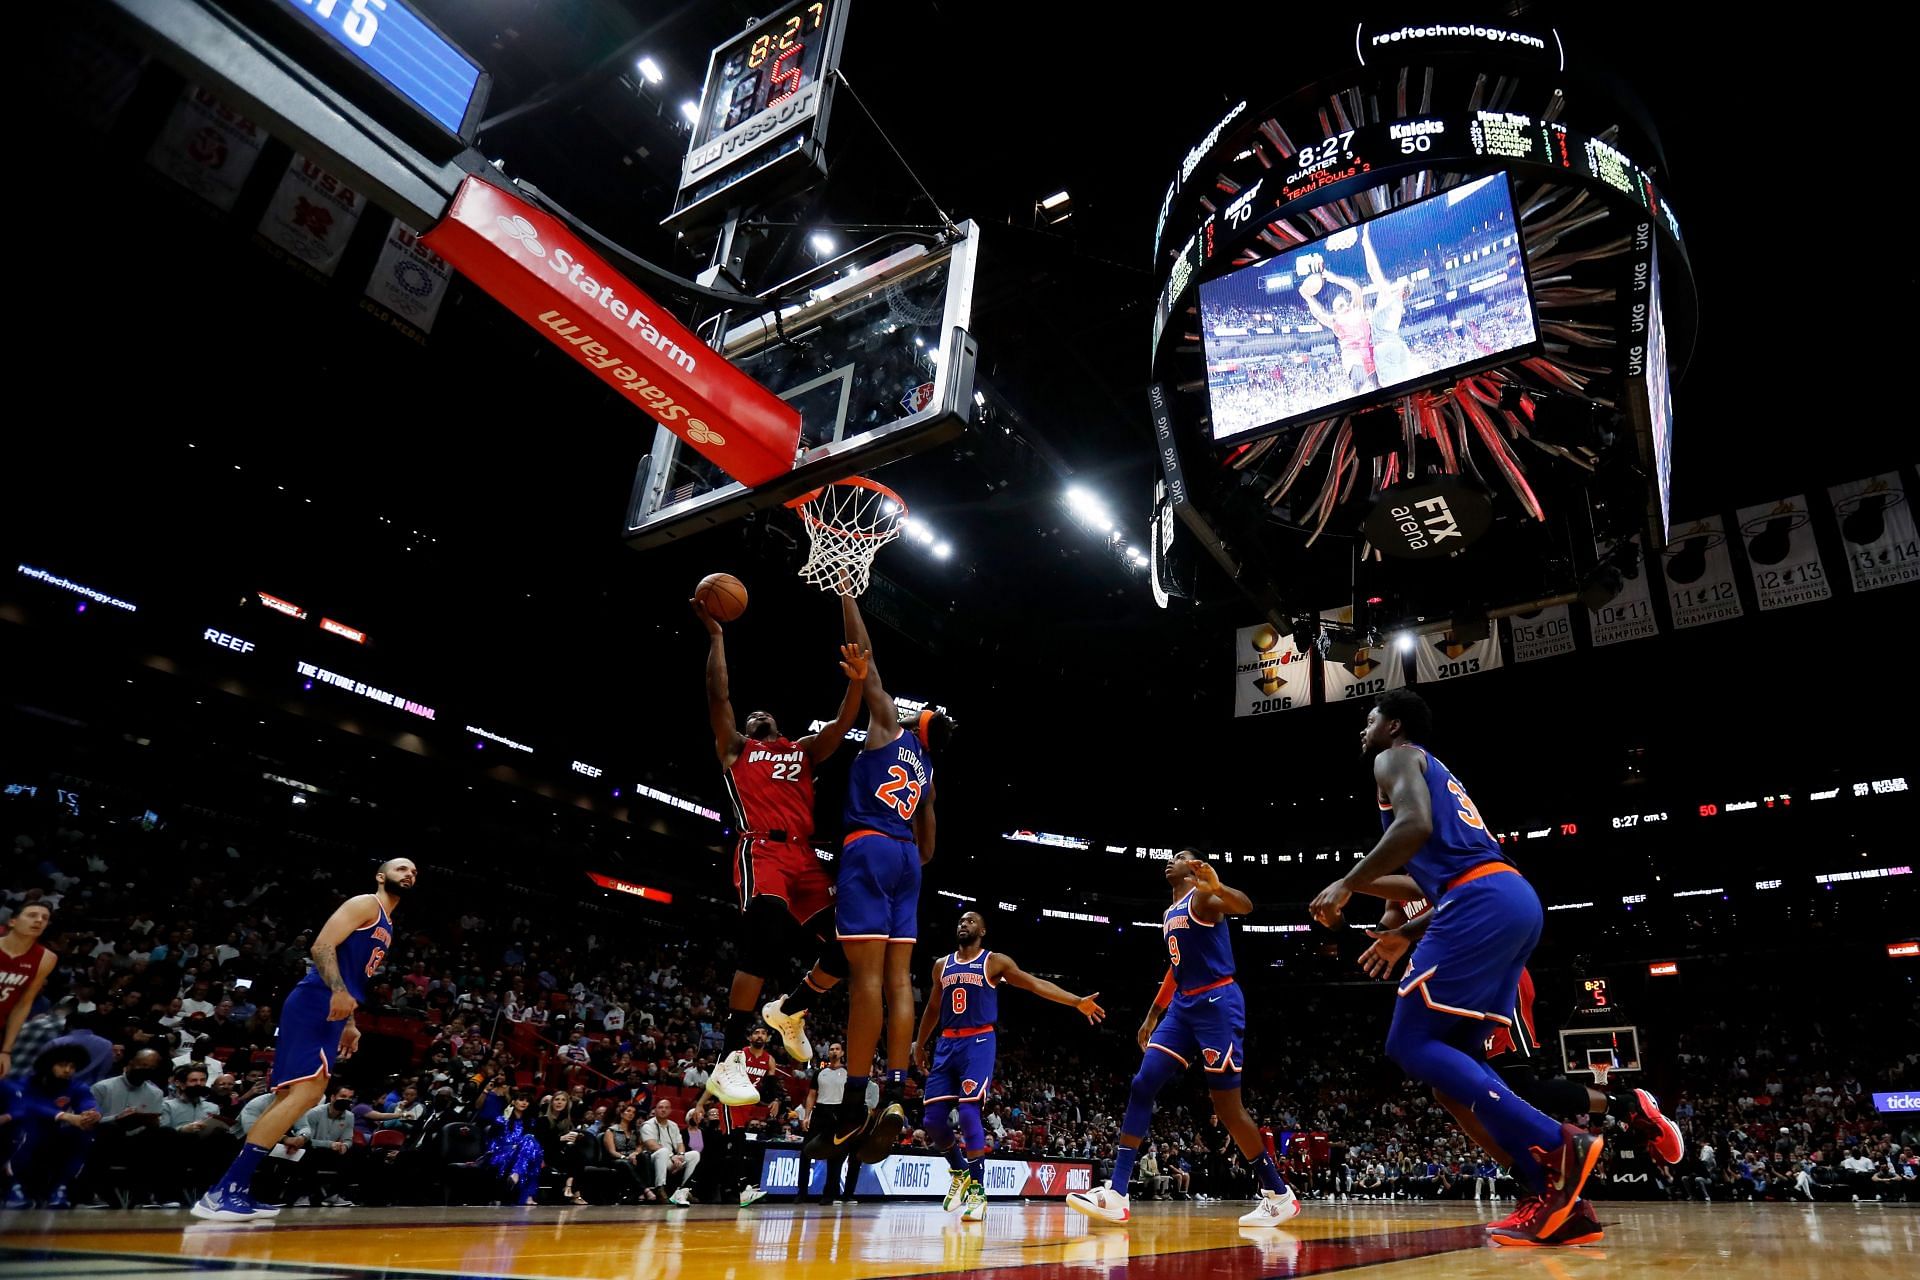 New York Knicks will host the Miami Heat at the Madison Square Garden on February 25.